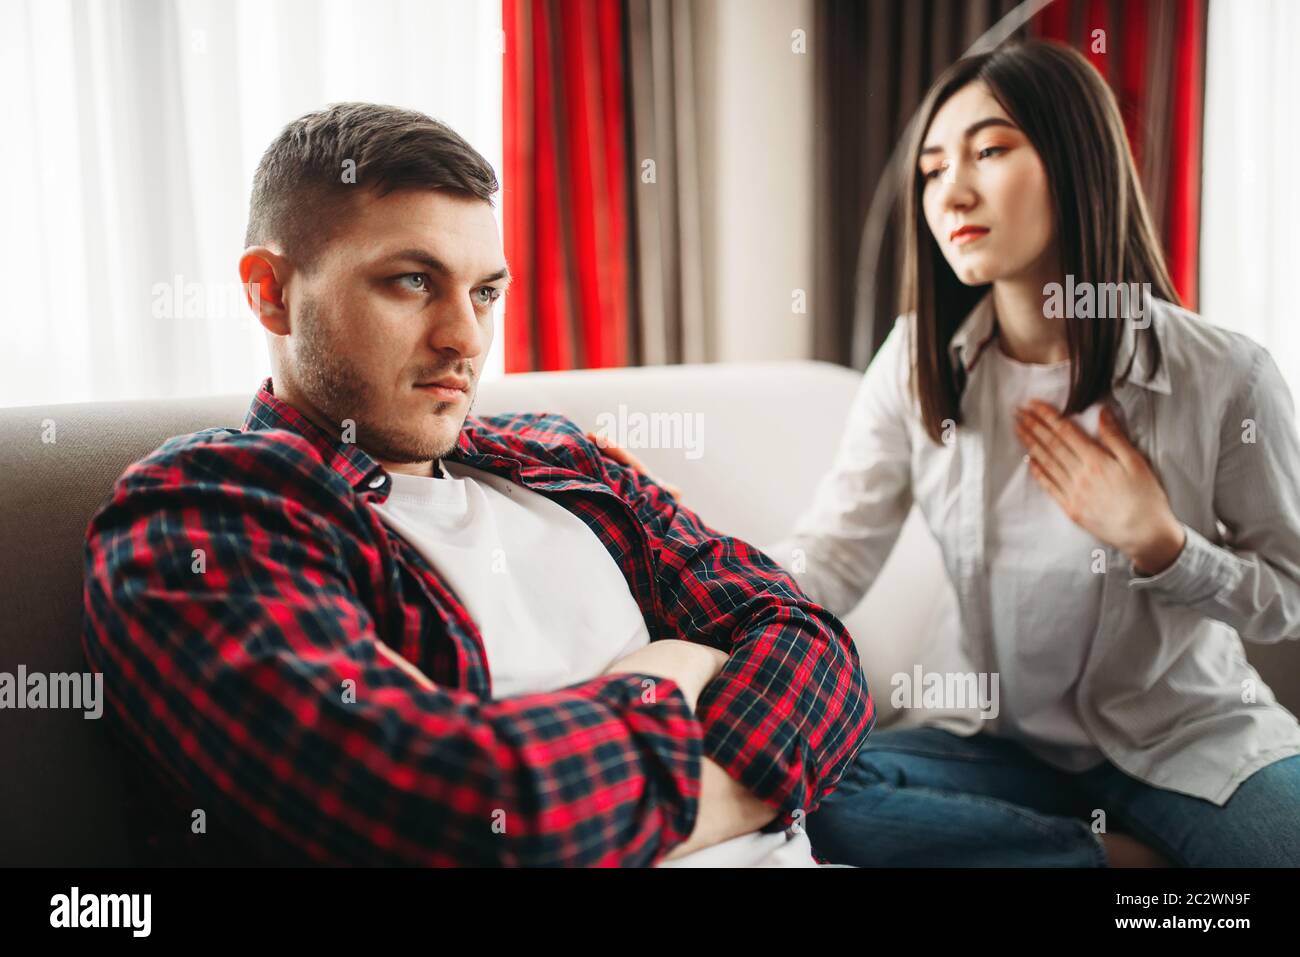 Wife asks her husband for forgiveness after family quarrel. Man and woman in abuse, couple in conflict Stock Photo